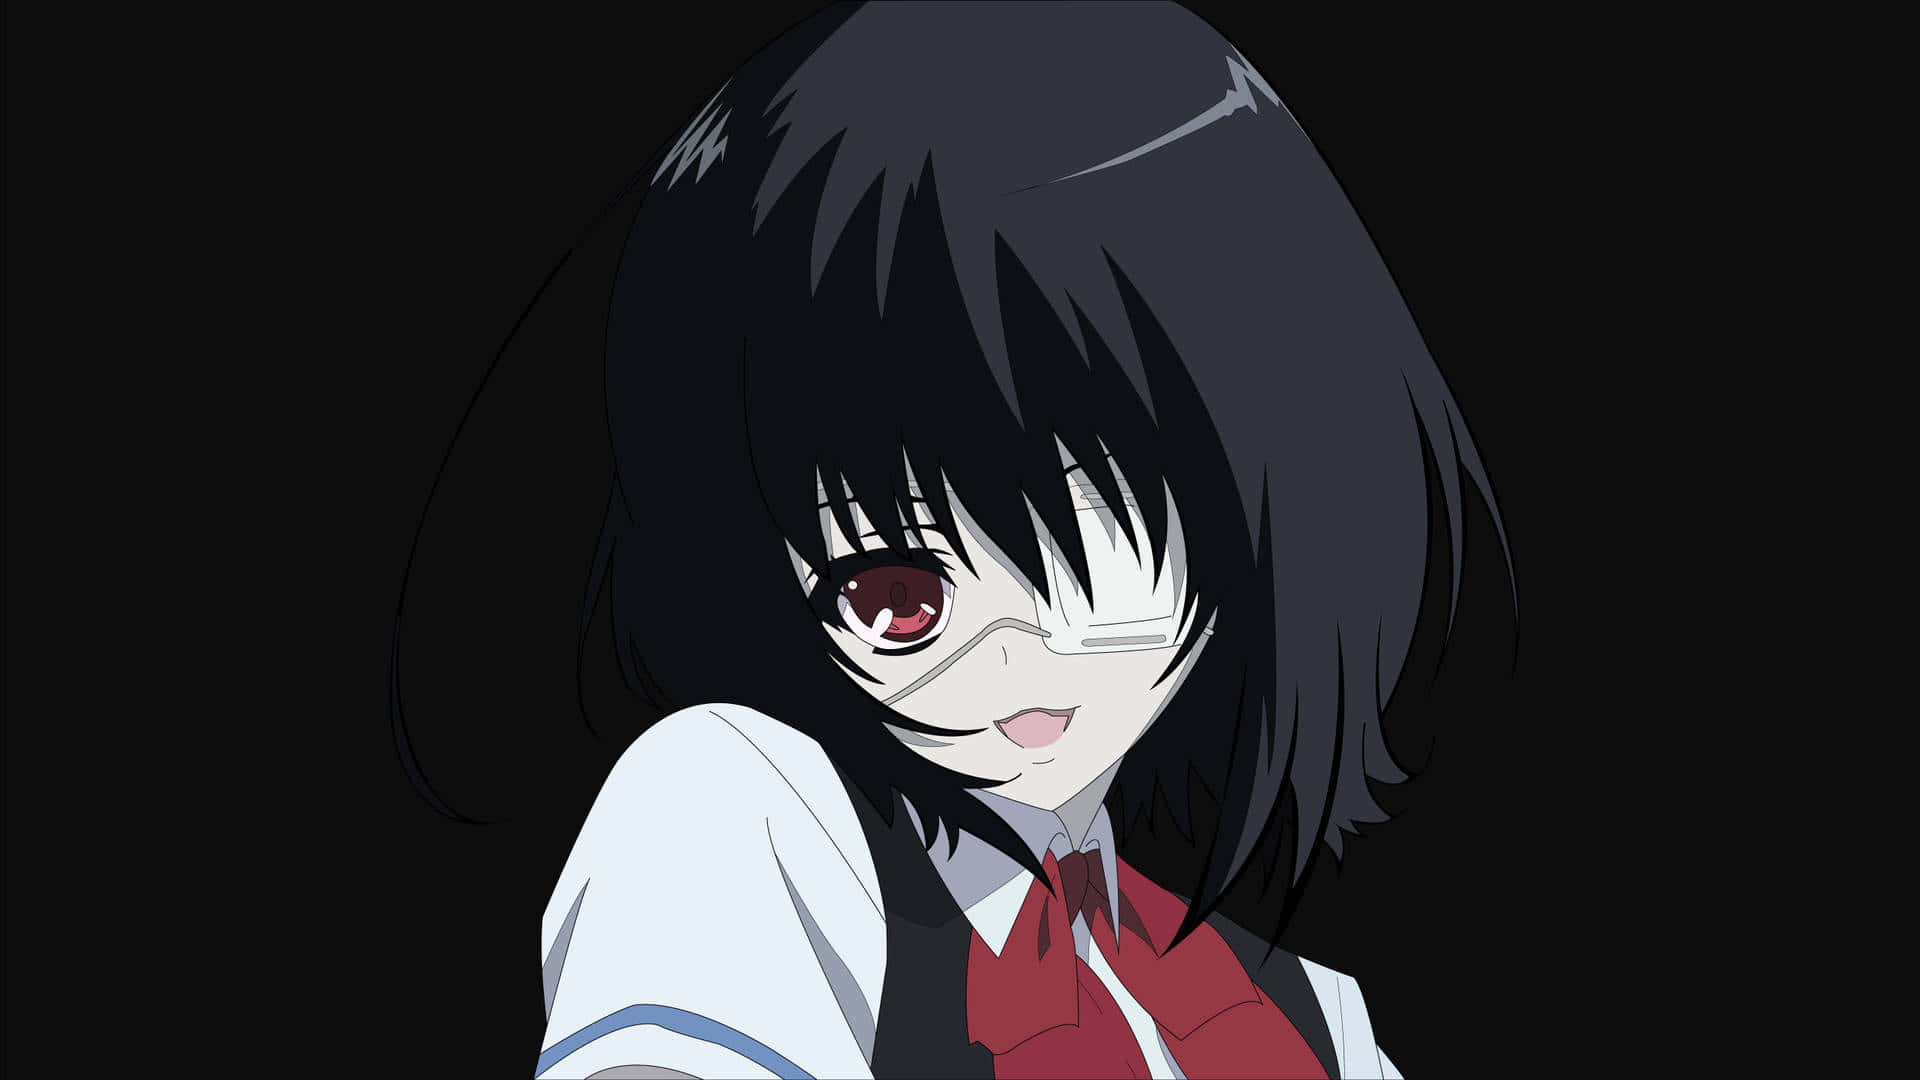 A Girl With Black Hair And Glasses Is Looking At Something